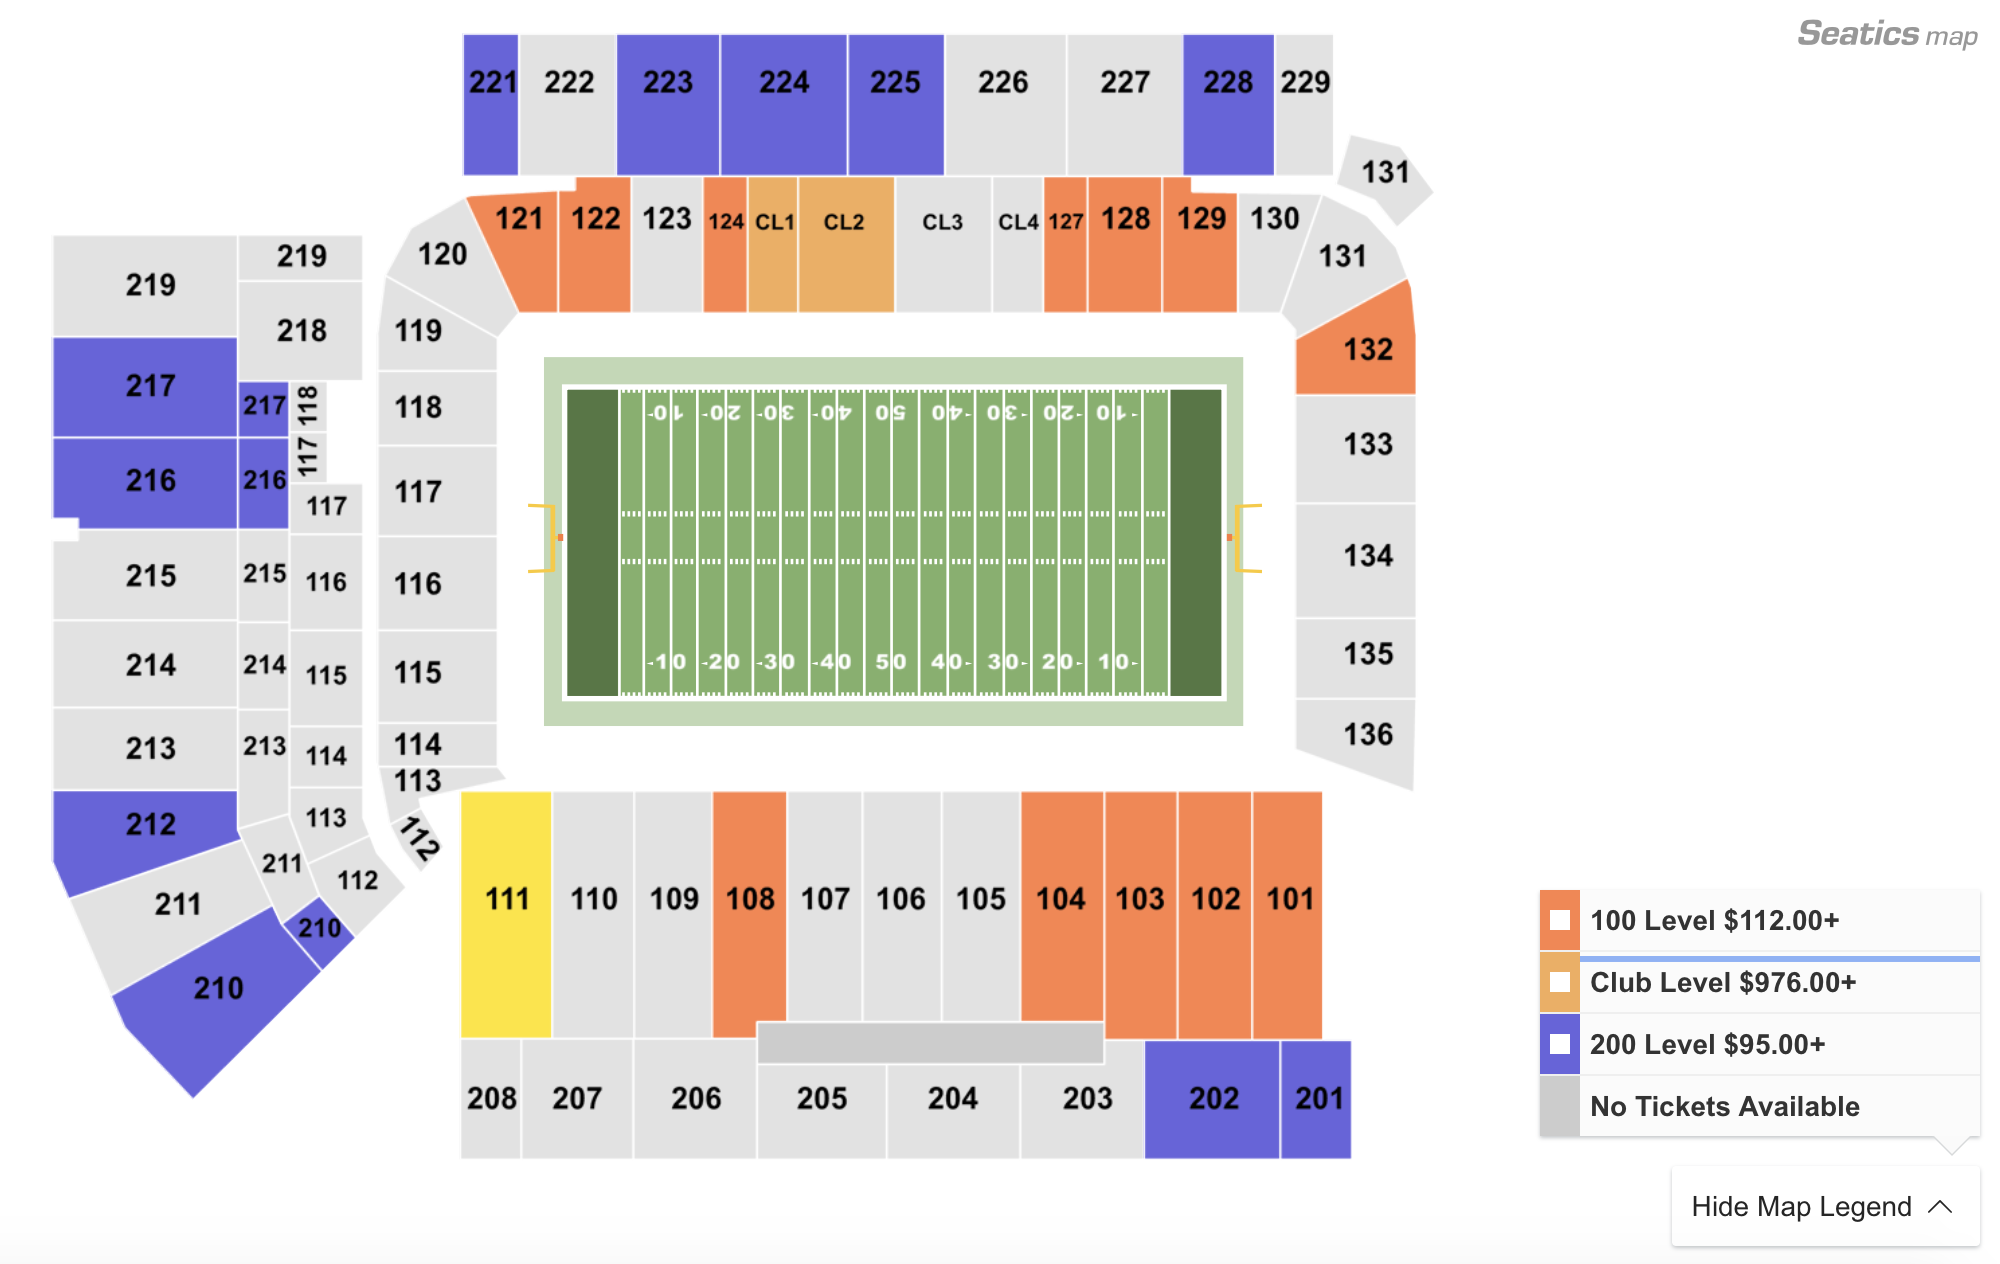 Where to find cheap Tech vs tickets at Bobby Dodd Stadium